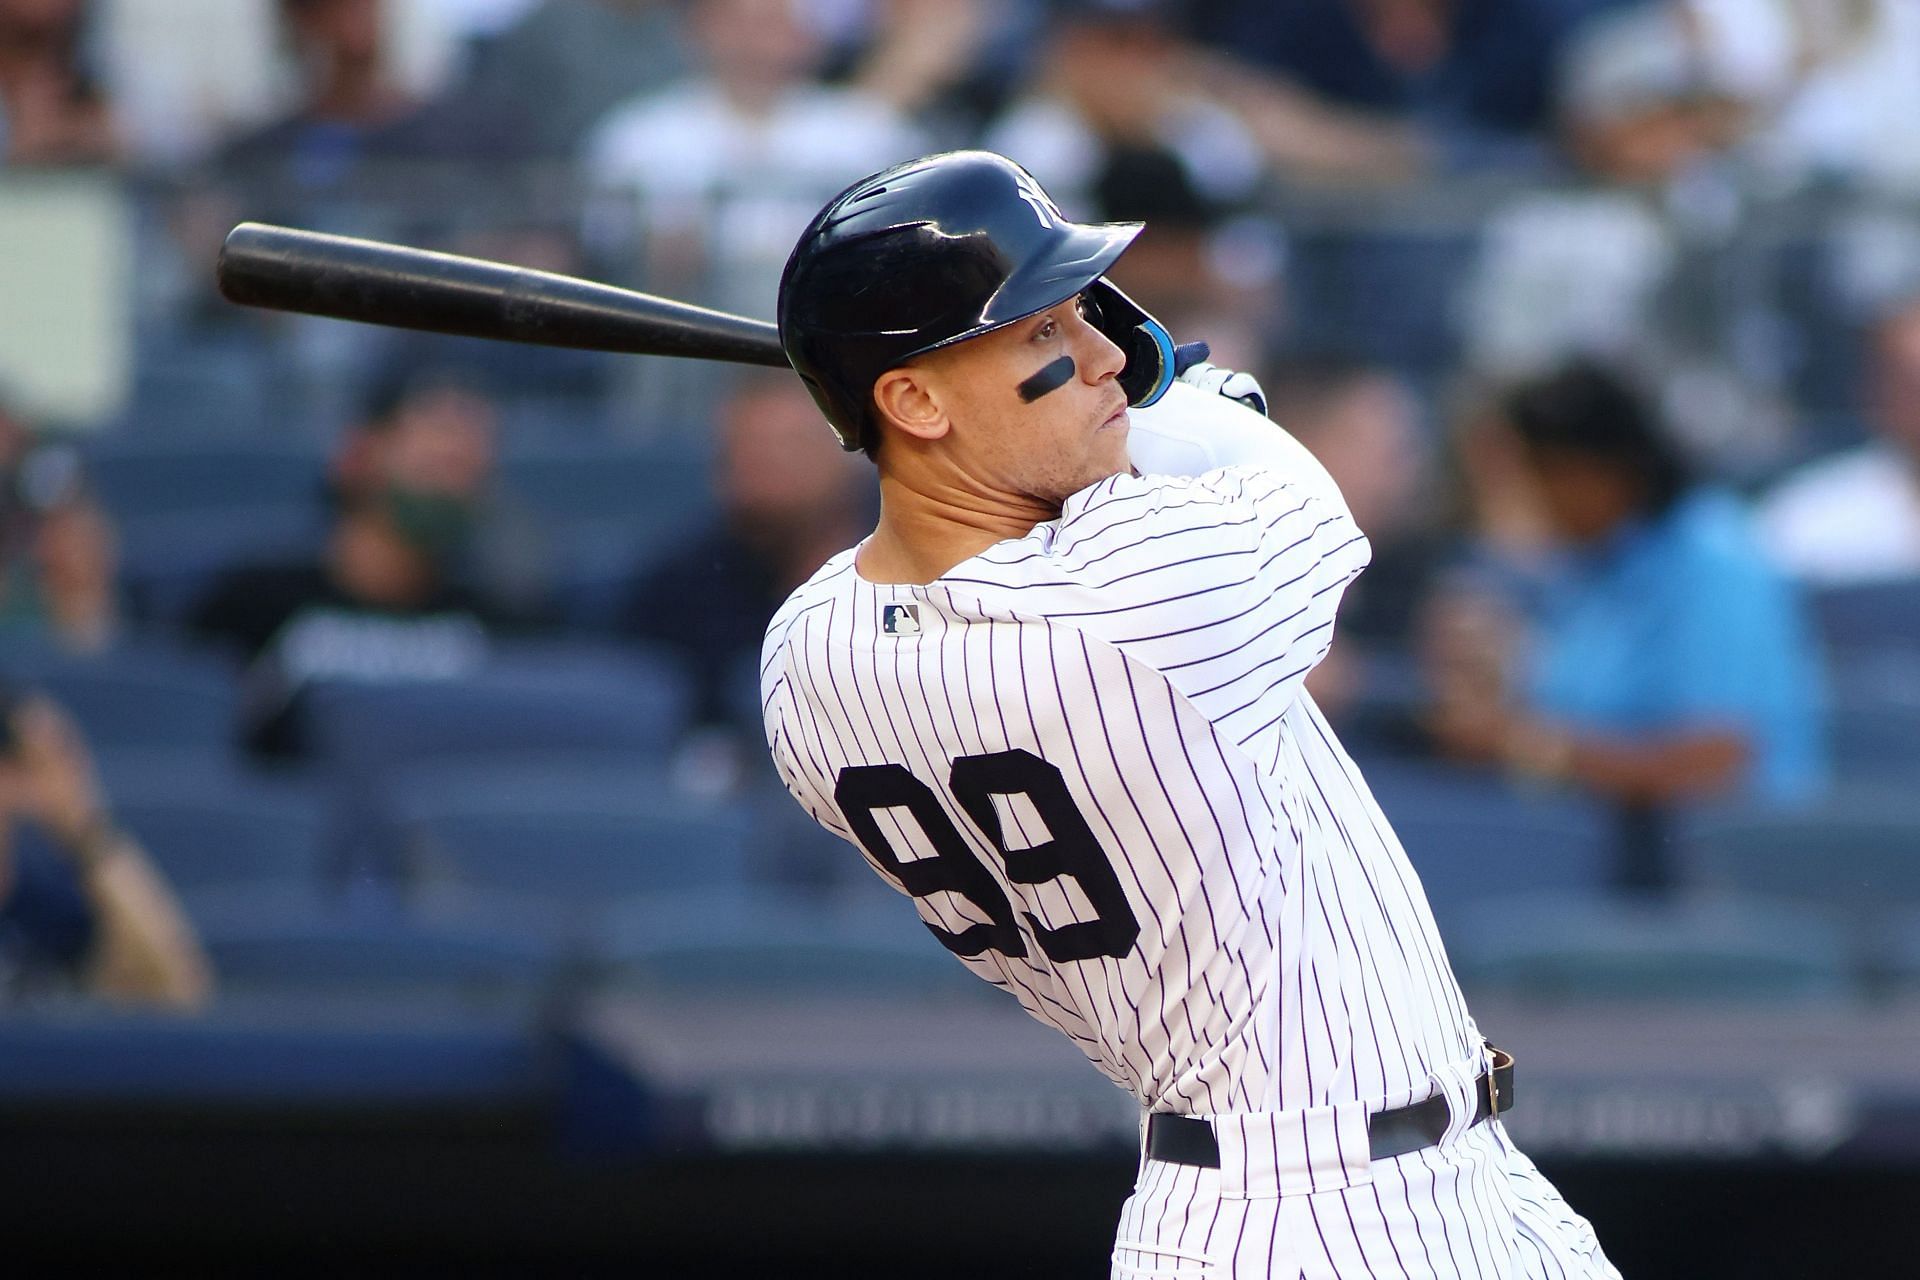 Aaron Judge picks the New York Yankees on the last day of Winter